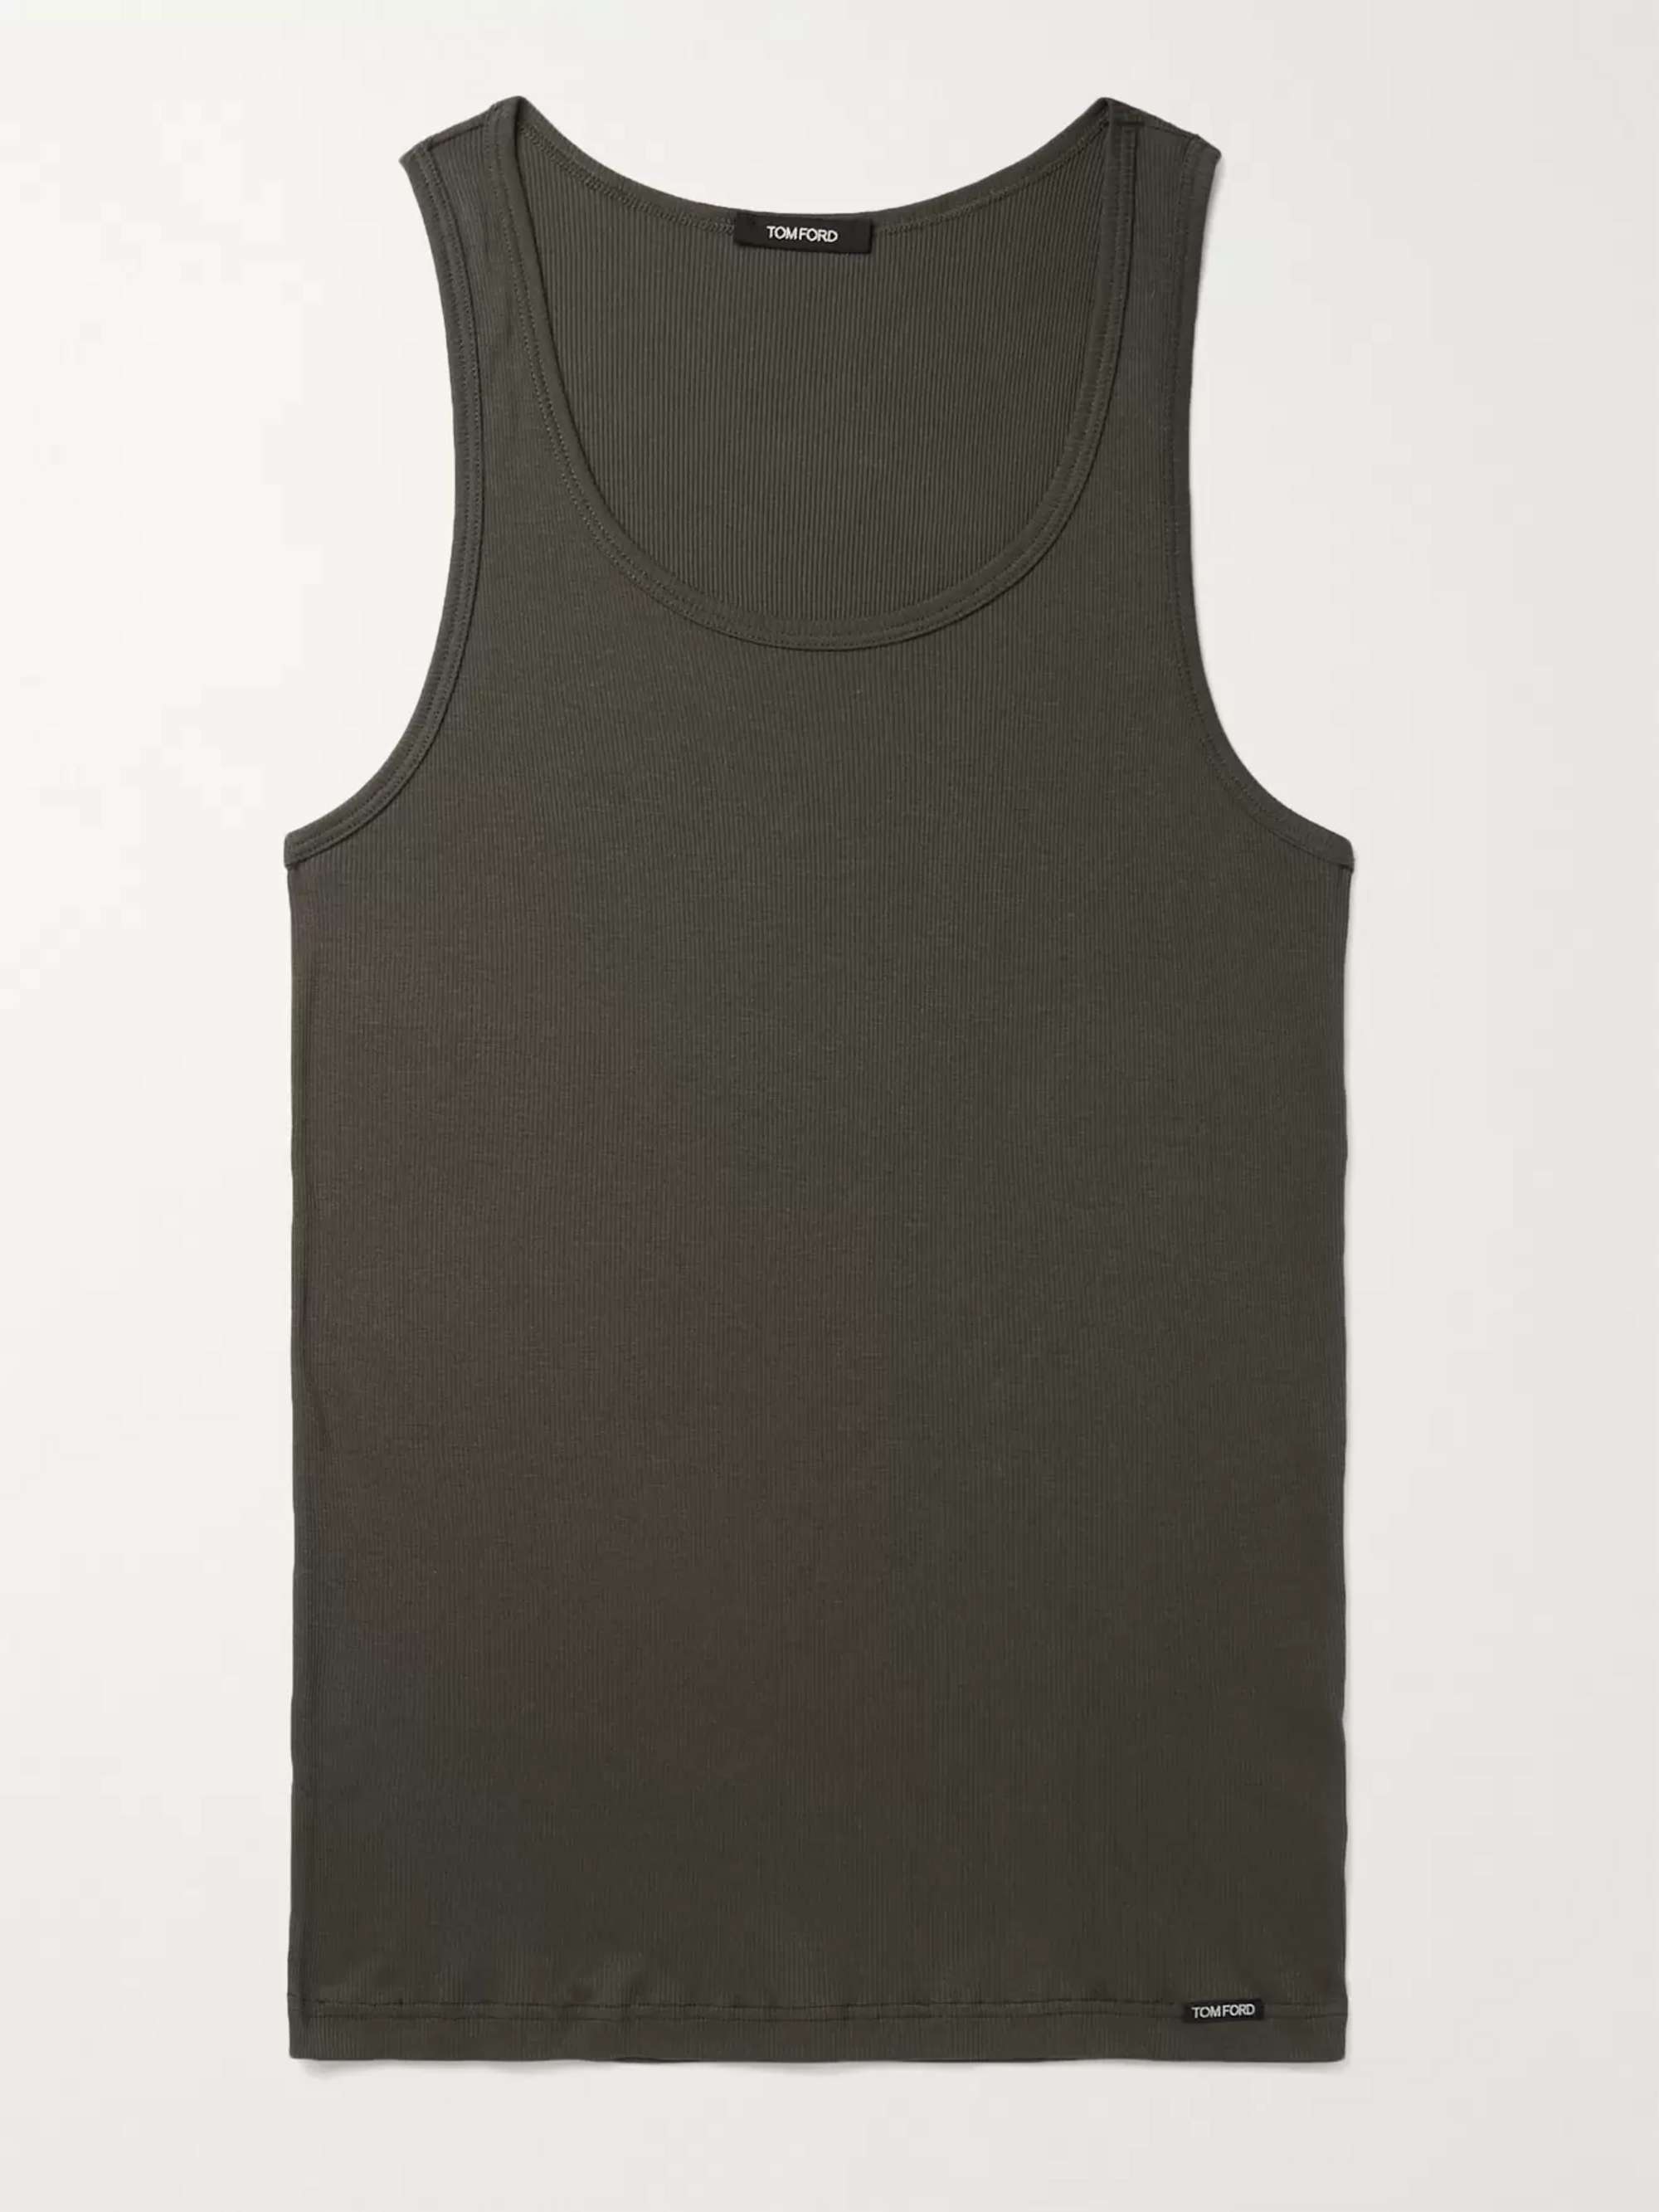 TOM FORD Ribbed Cotton and Modal-Blend Jersey Tank Top